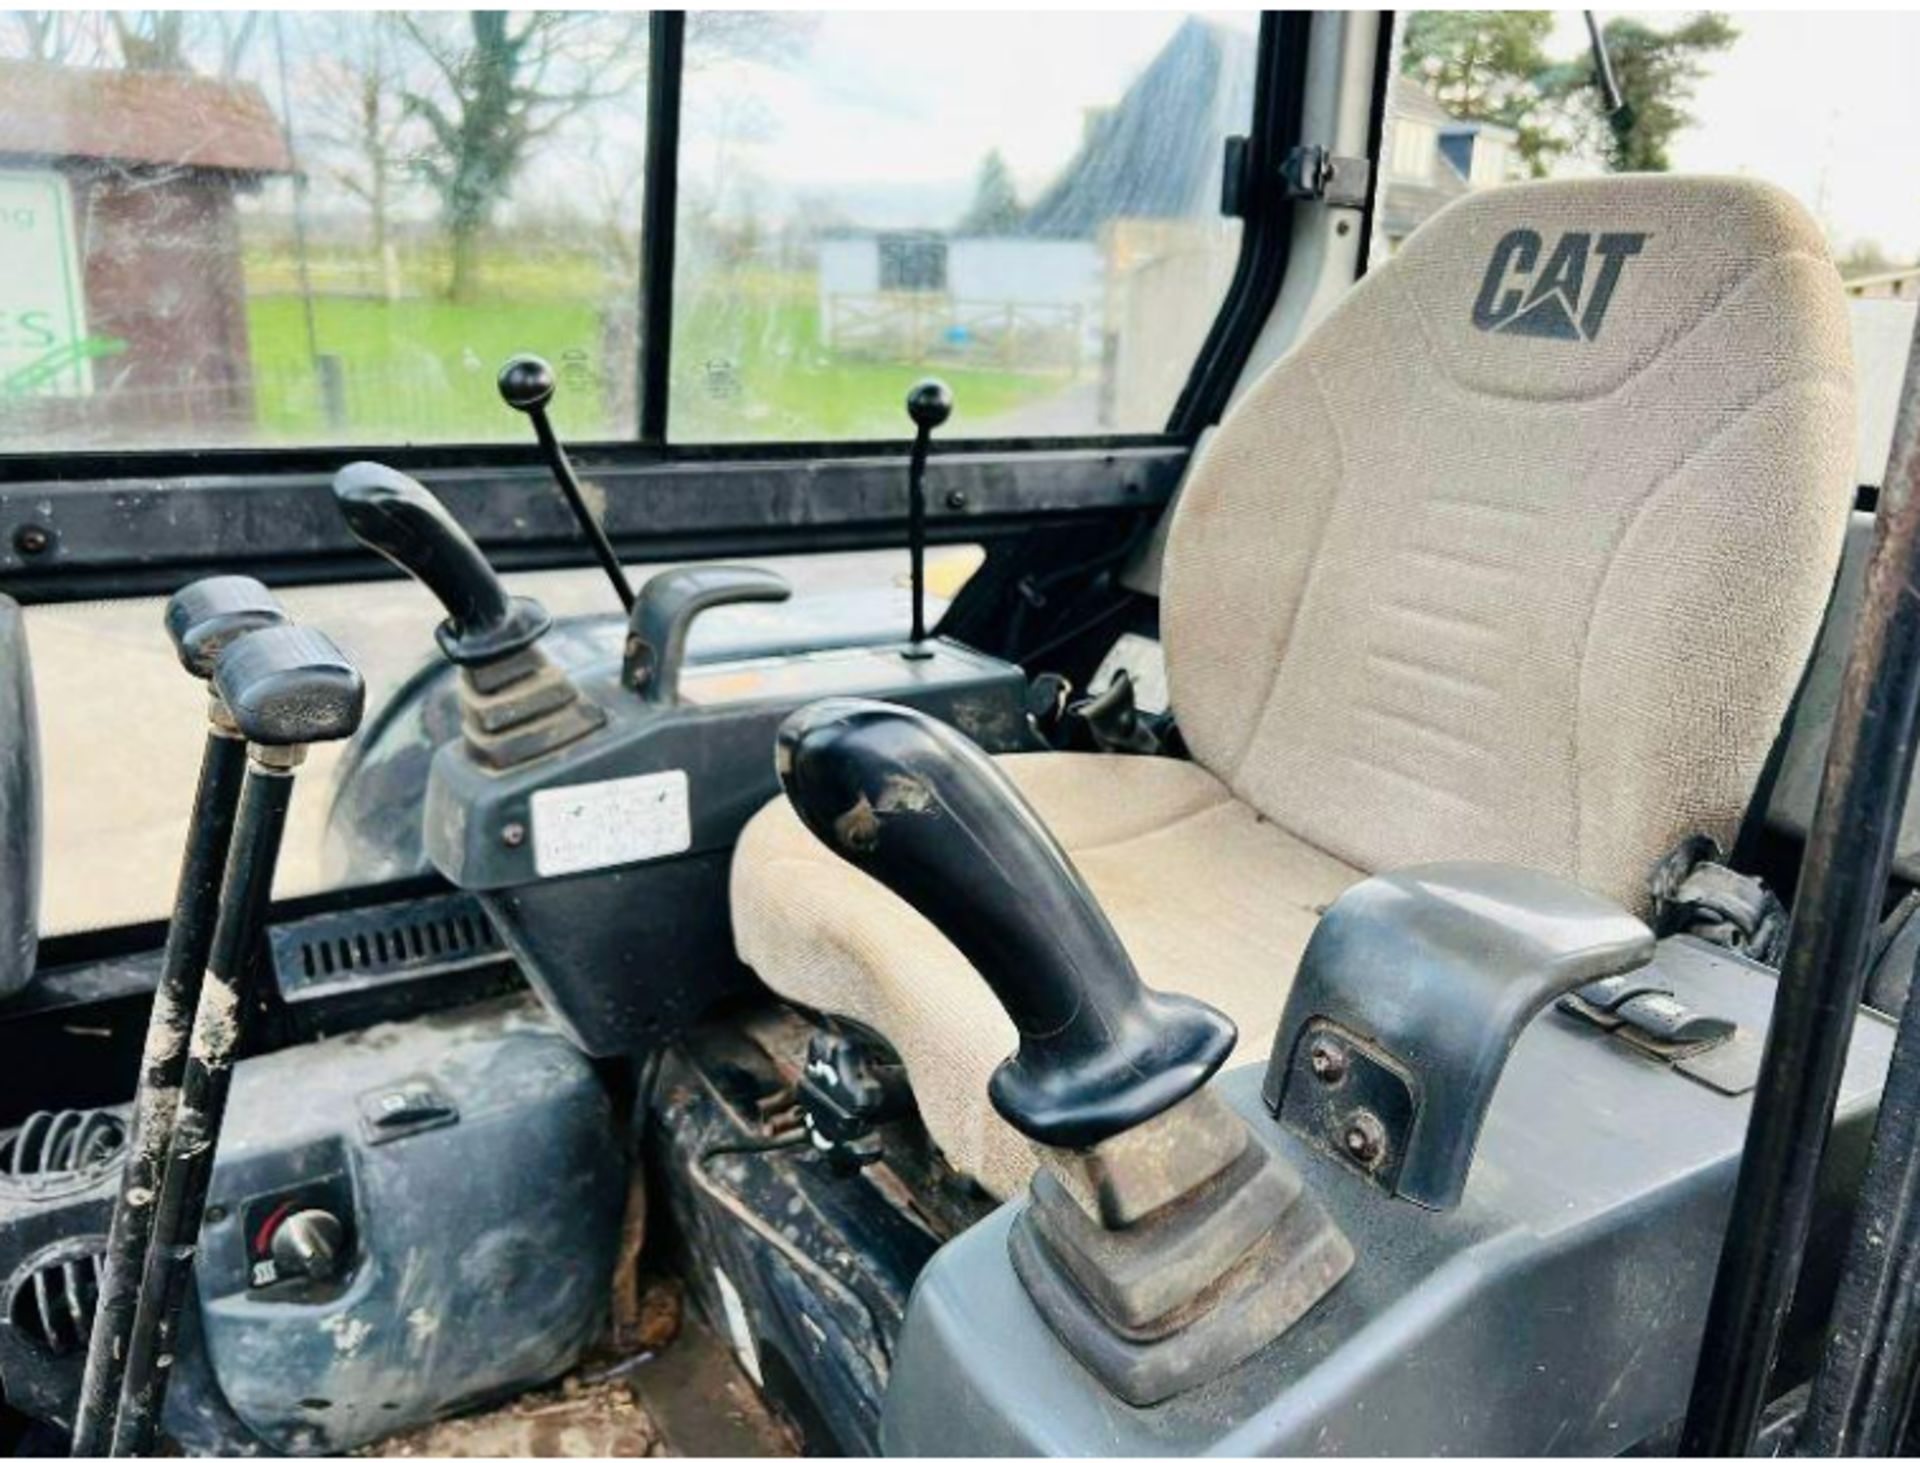 CATERPILLAR 302.5 TRACKED EXCAVATOR * ONLY 2237 HOURS * C/W 2 X BUCKETS - Image 10 of 13